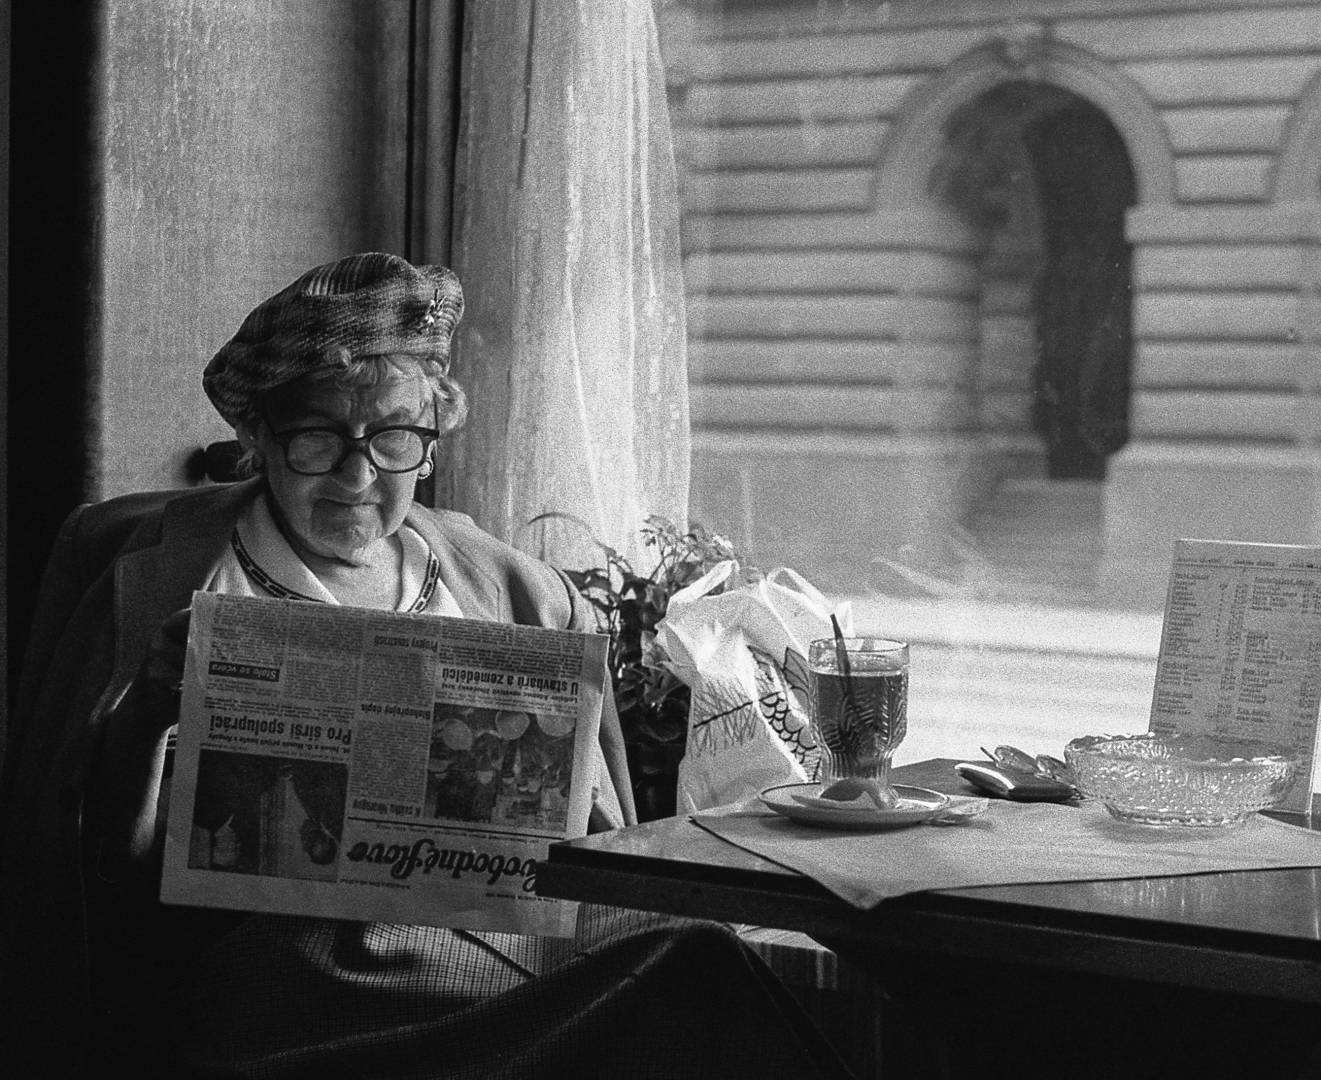 Image Of Old Lady Reading A Newspaper In A Vintage Photo